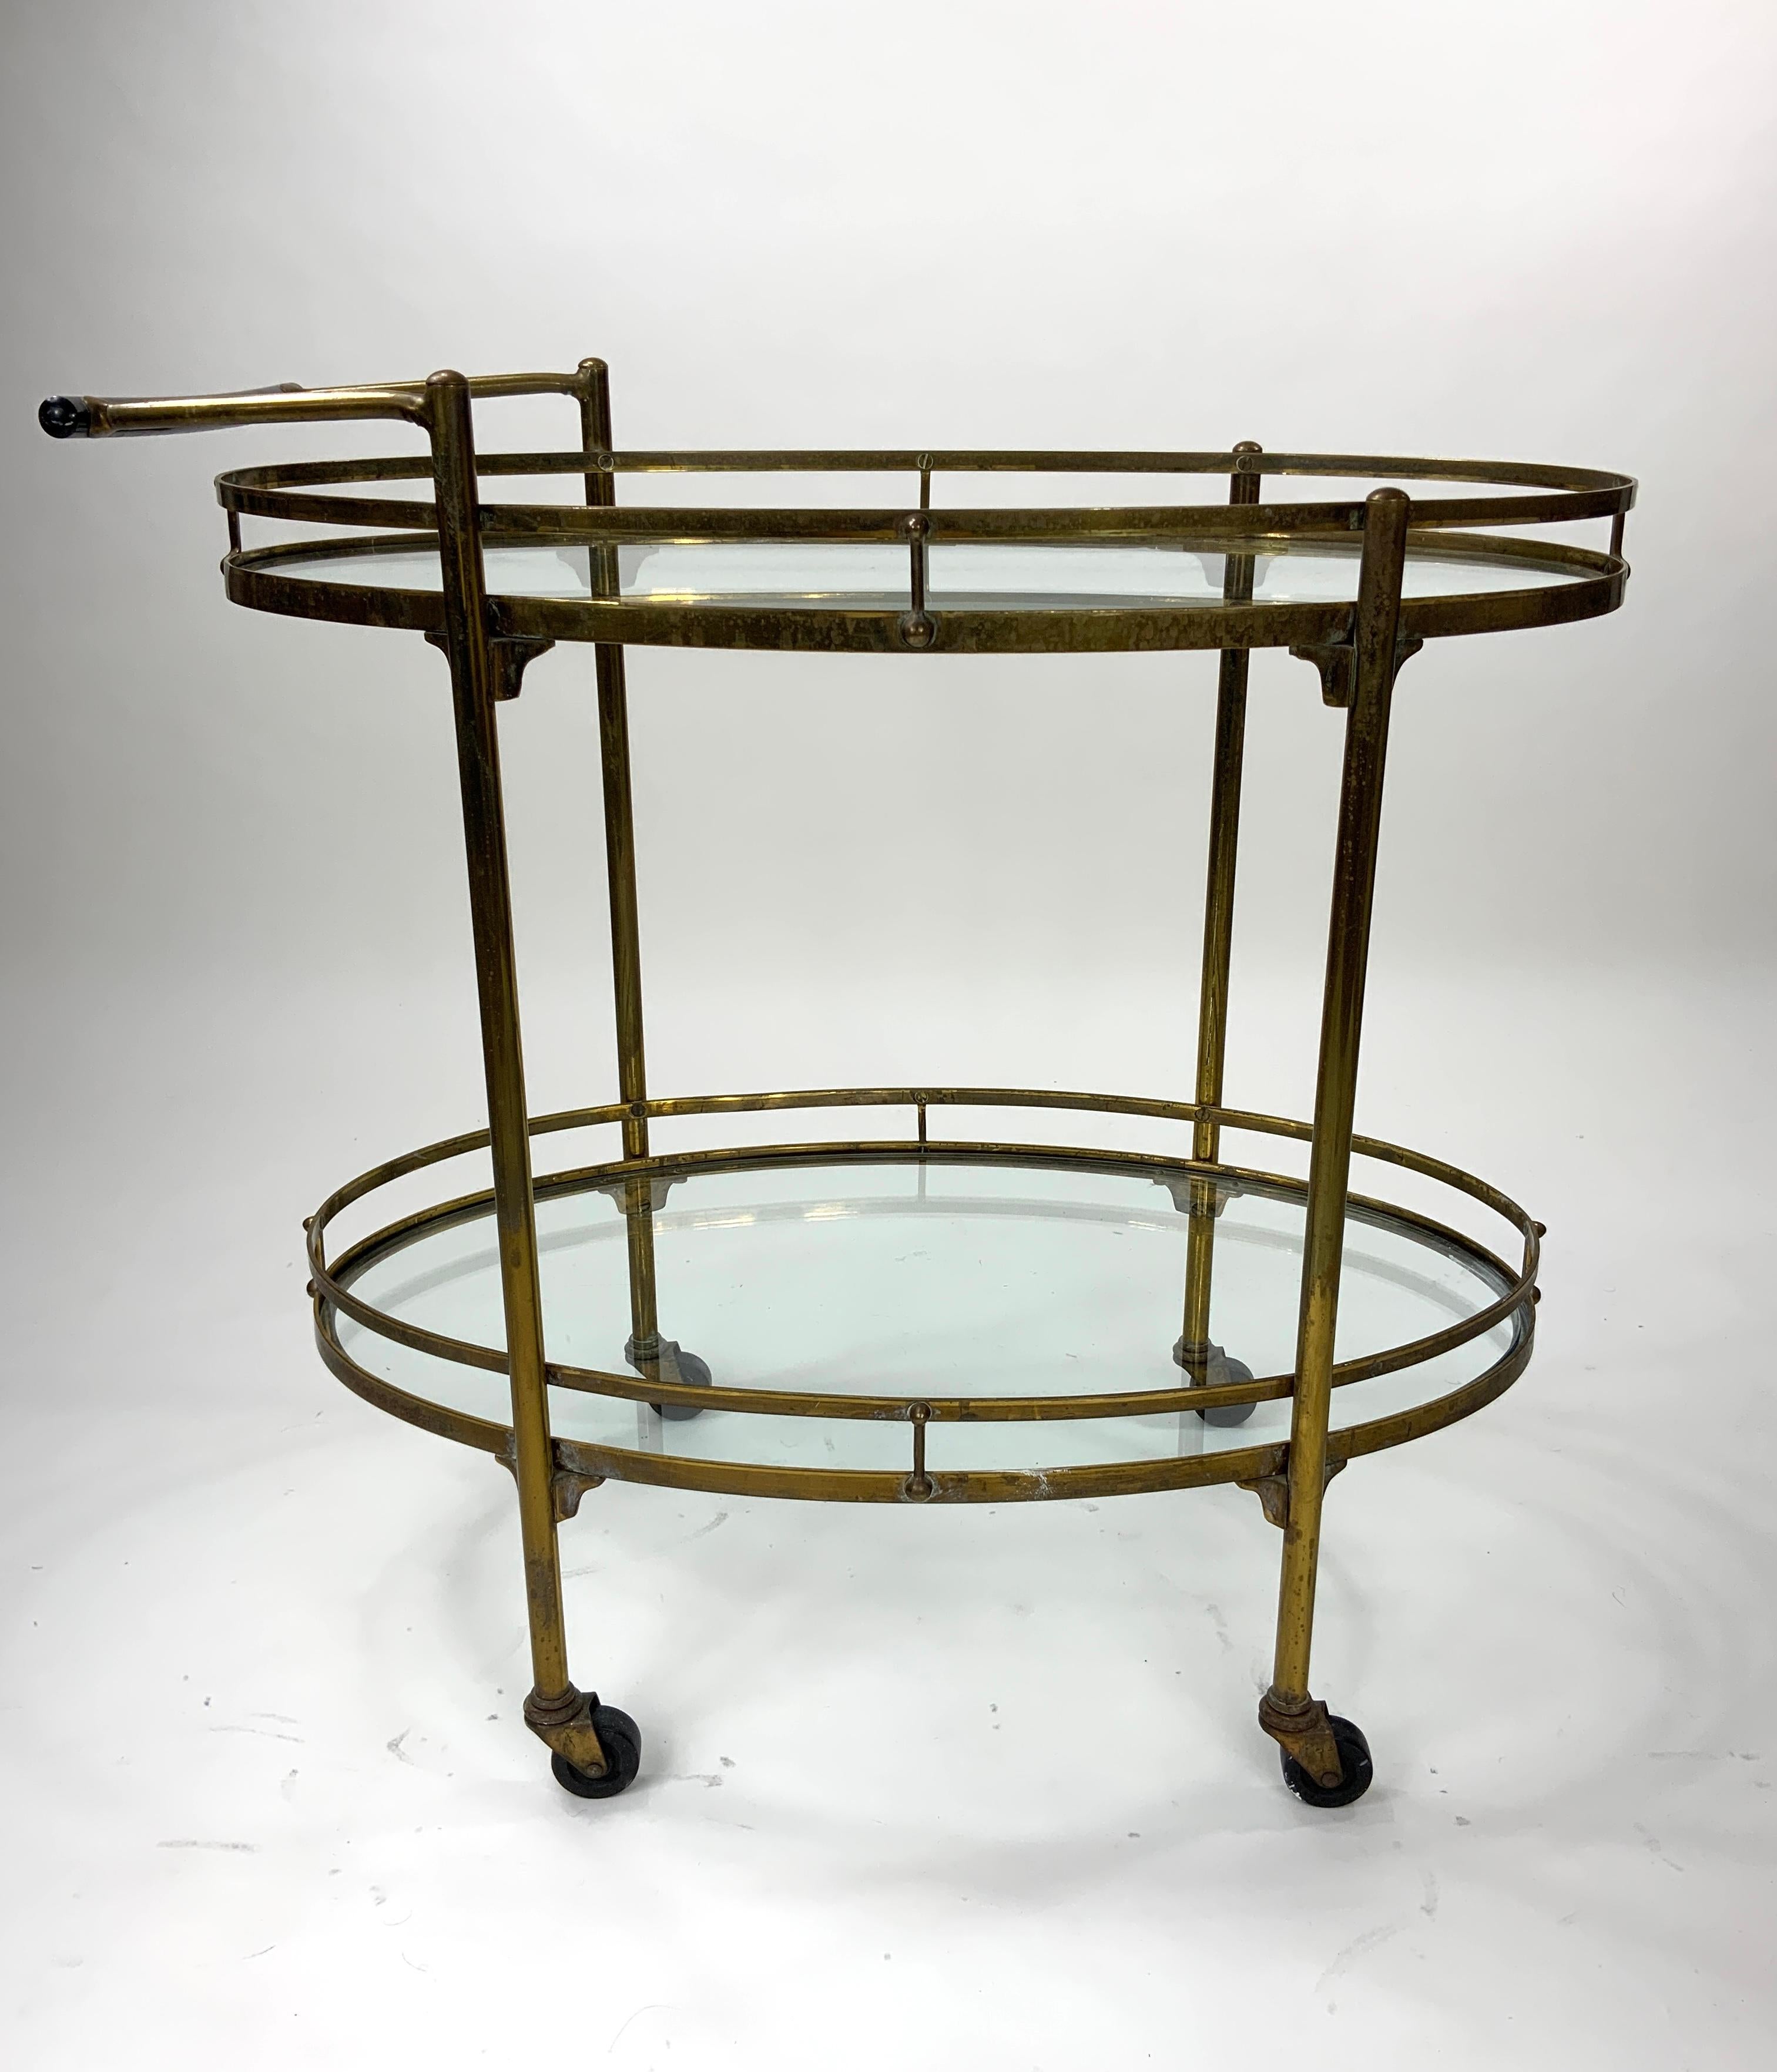 An oval brass bar cart/tea trolley from the 1940’s and possibly late 1930’s attributed to barware and furniture manufacturer Maxwell Phillips of New York. It has 2 tiers with each having a double-ribboned guardrail and a glass shelf. The cart sits